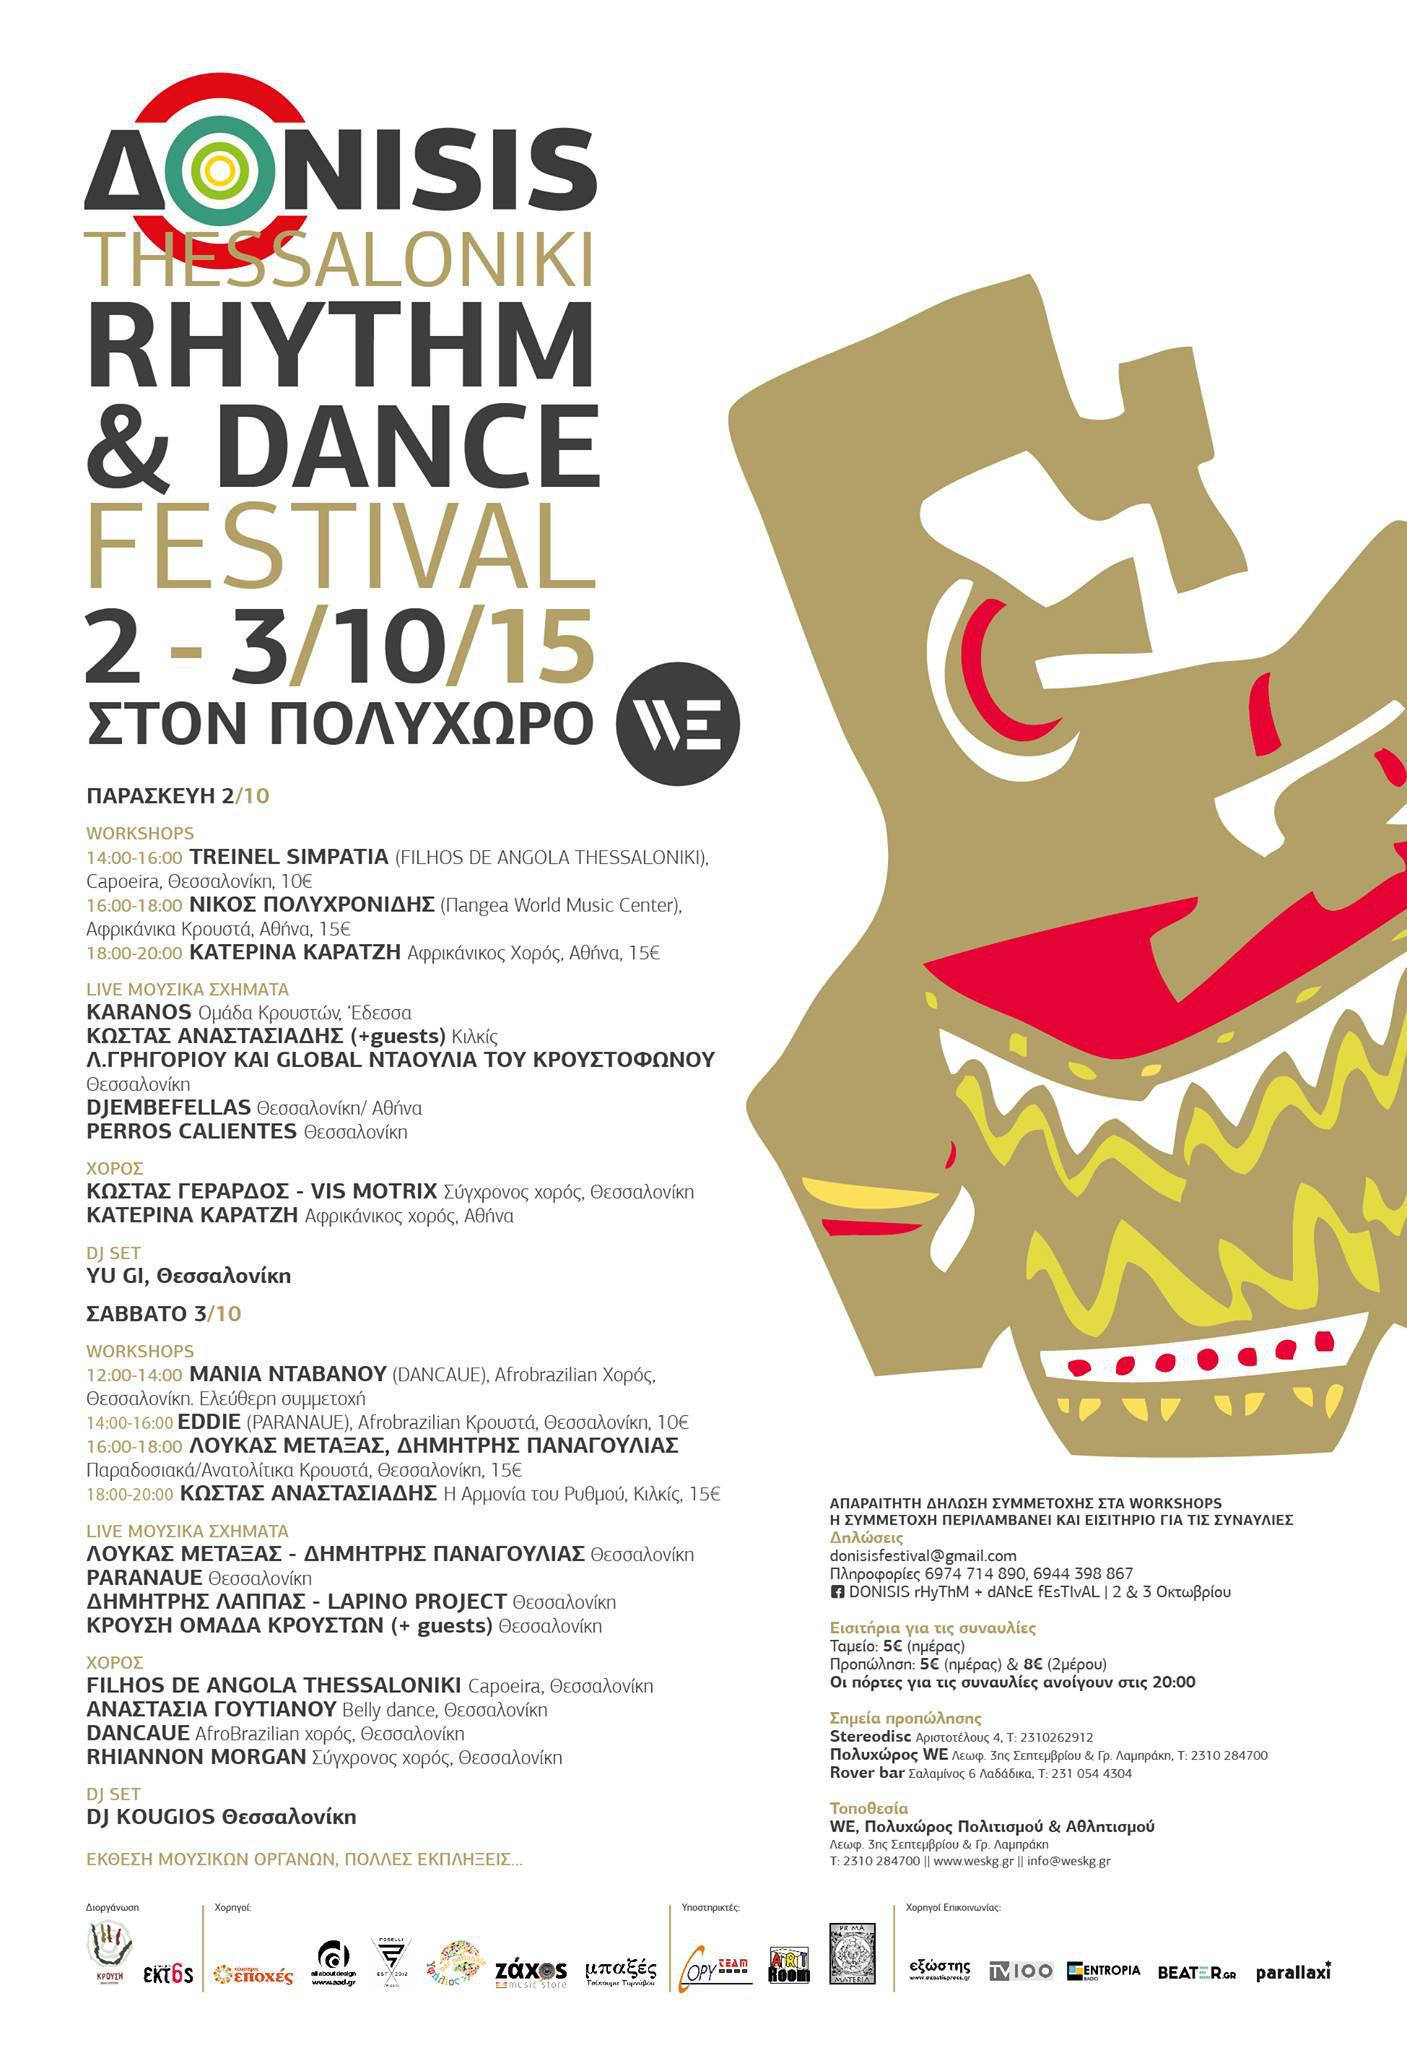 donisis thessaloniki rhythm and dance festival poster